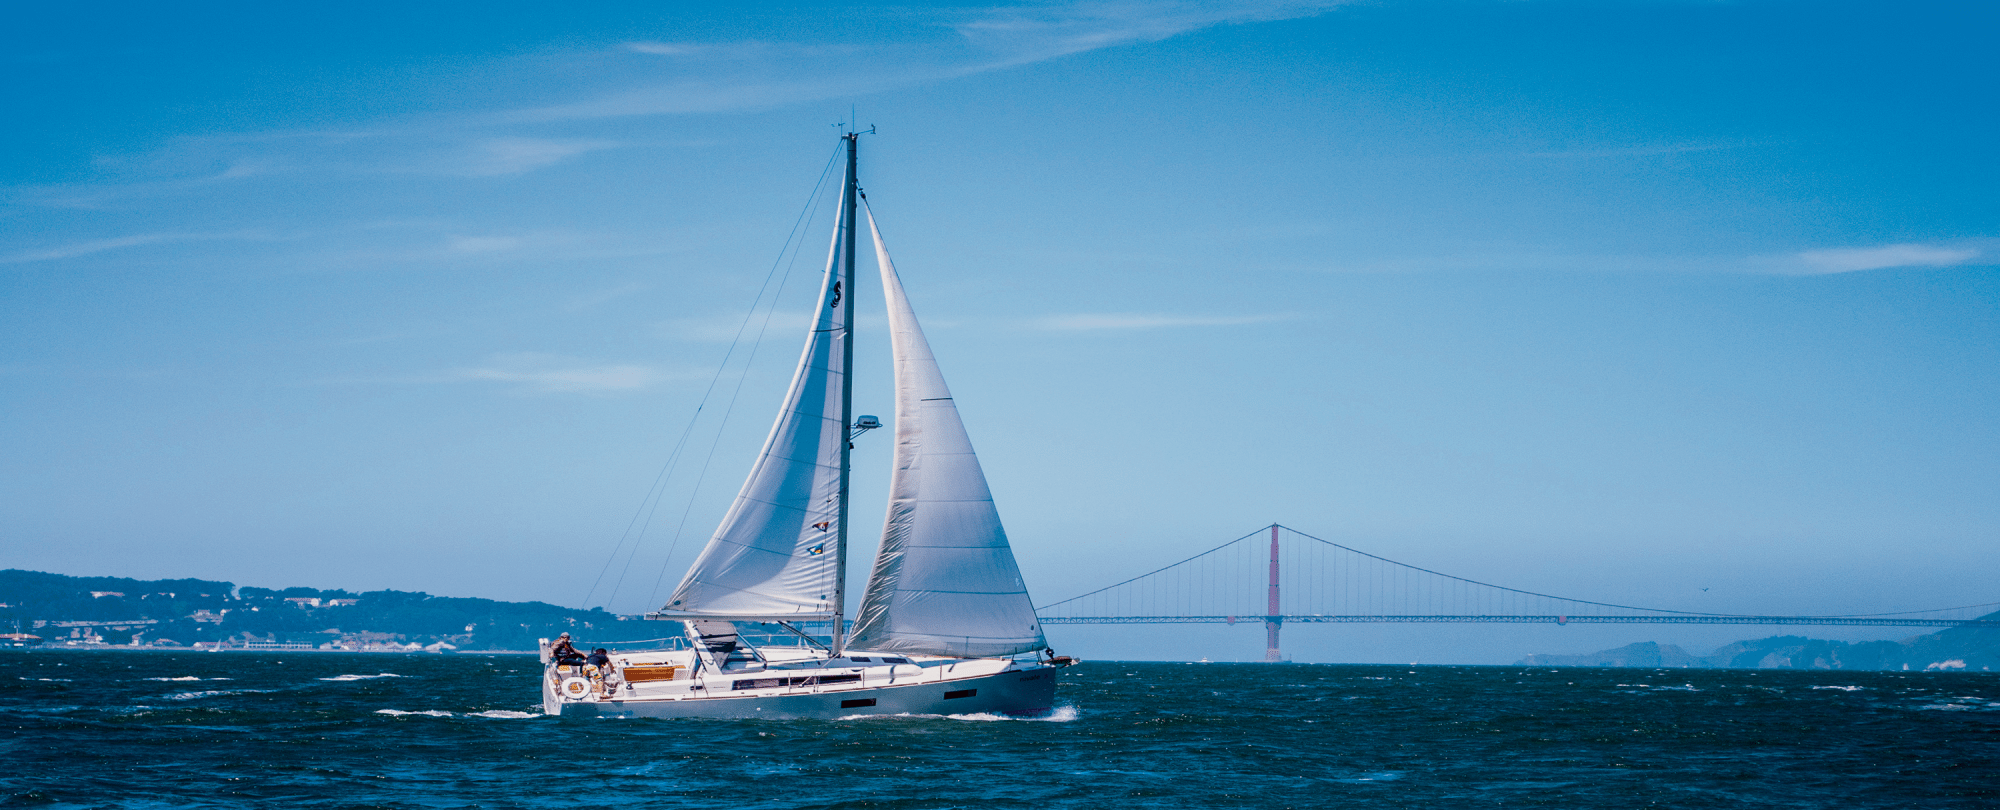 June Sailing on the Bay